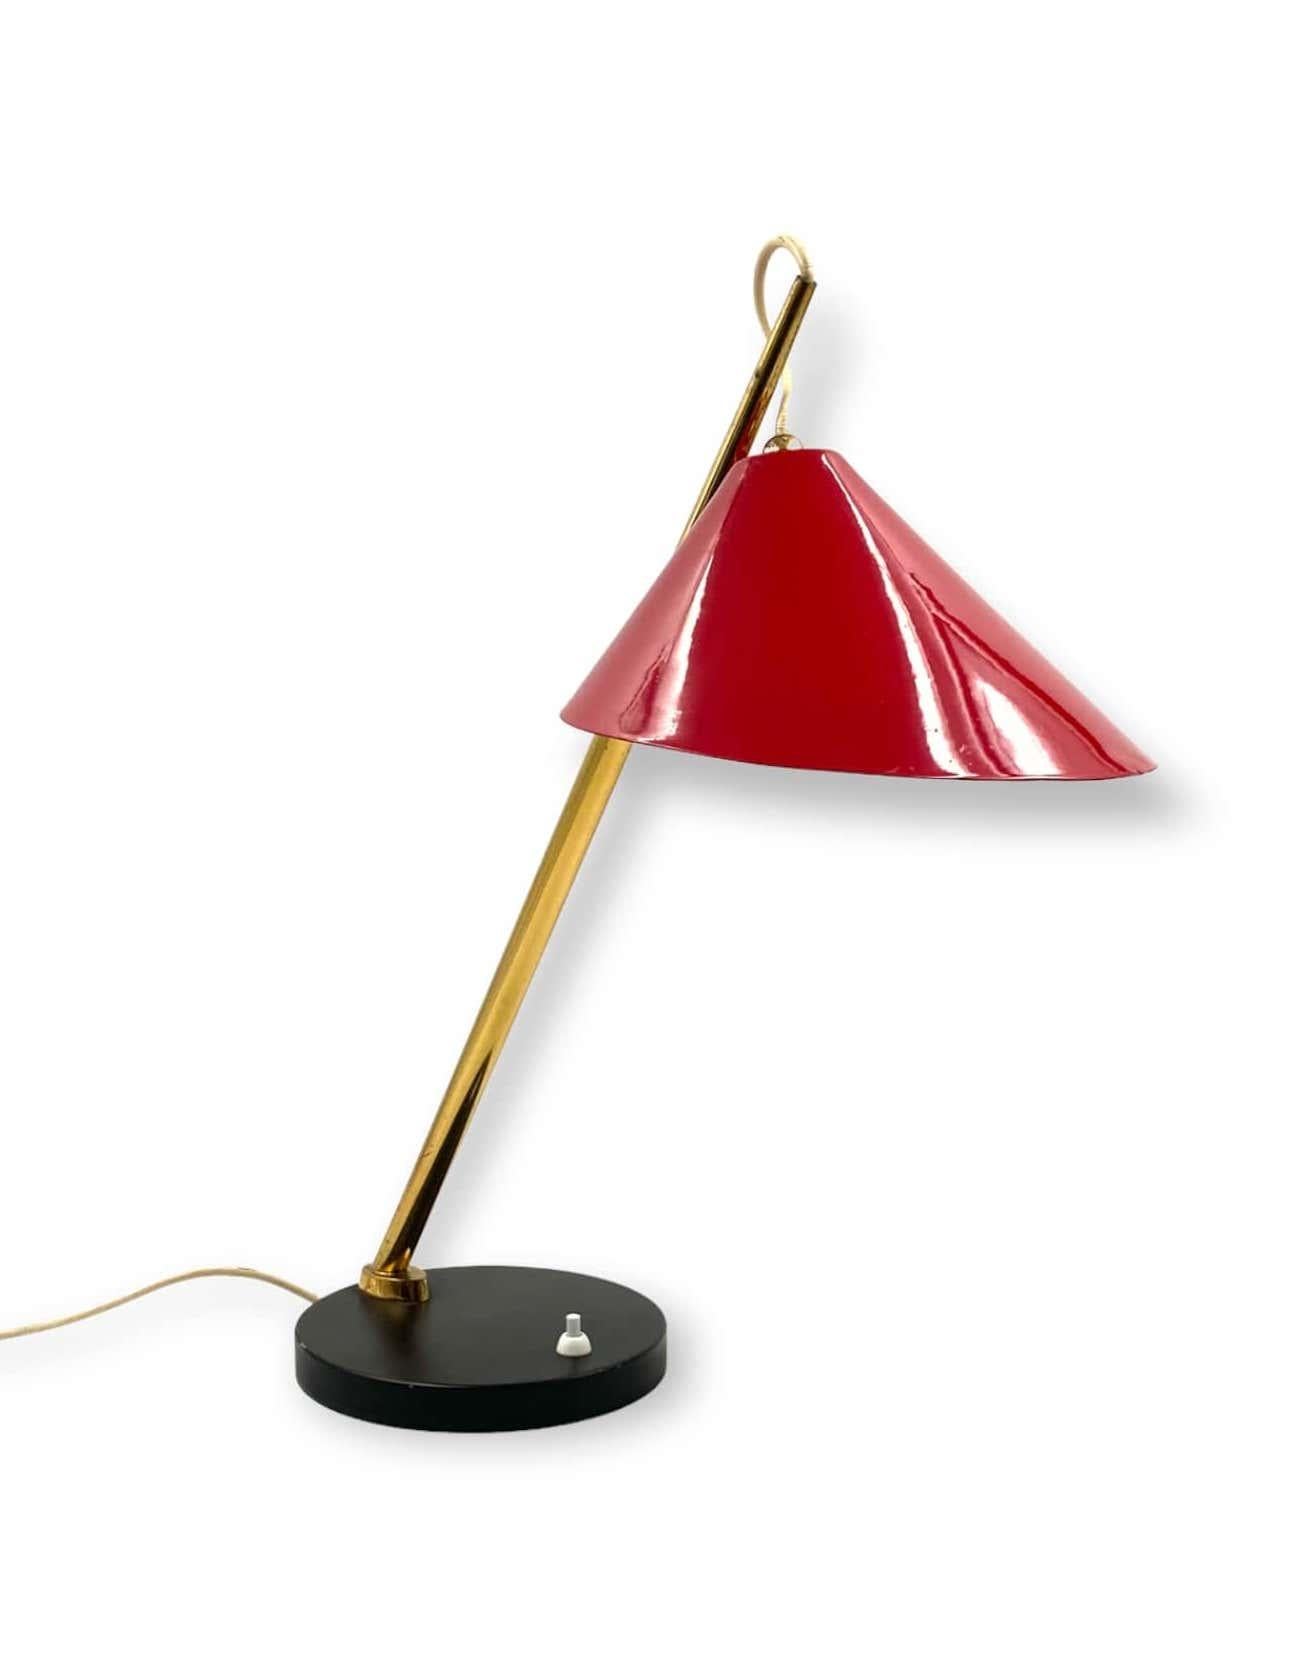 Midcentury Red Table Lamp, Lumen, Italy, 1960s For Sale 3